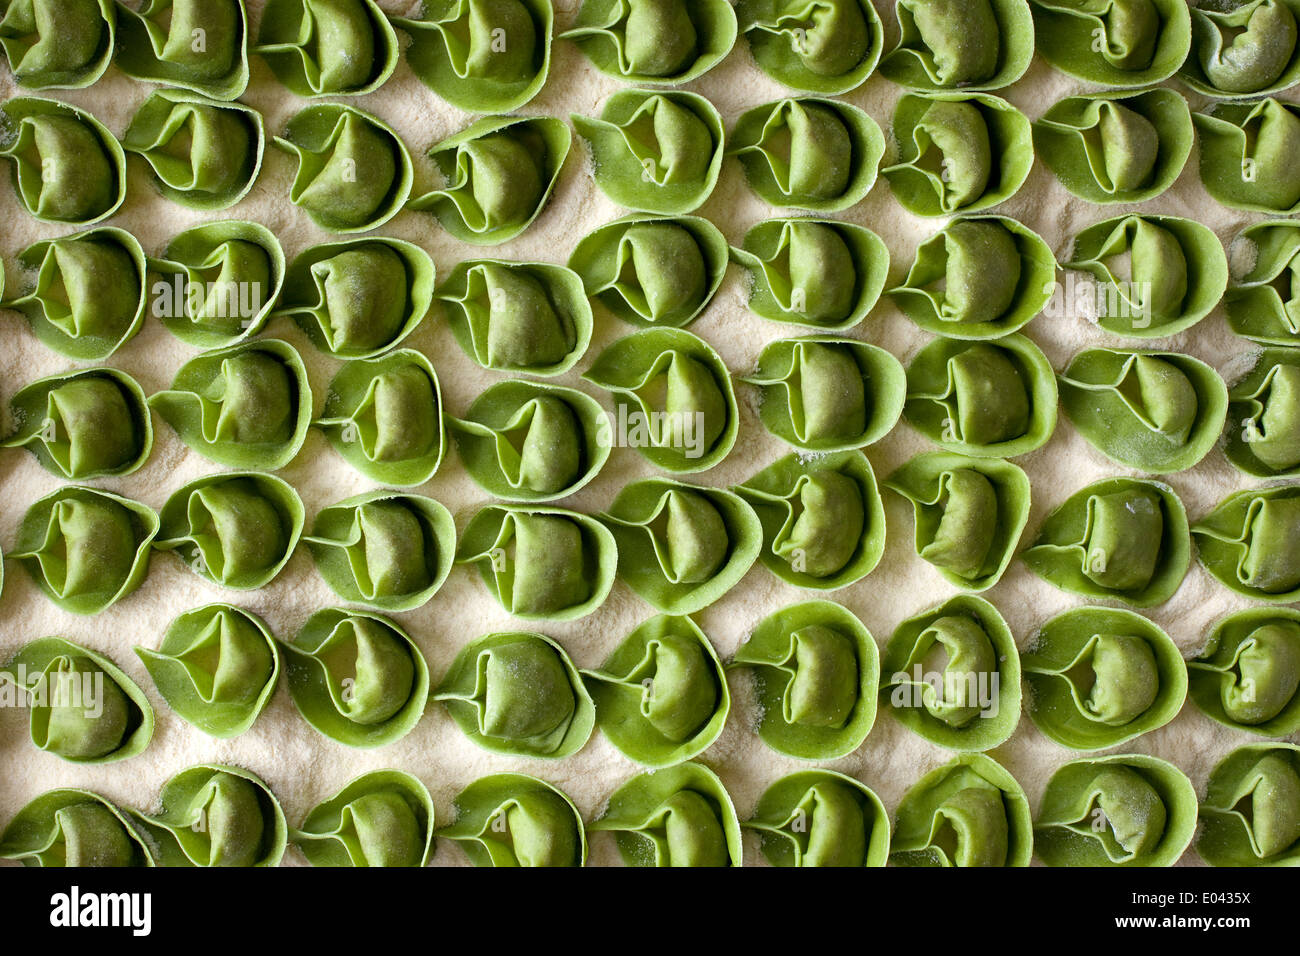 A tray full of green tortellini pasta waiting to be cooked Stock Photo